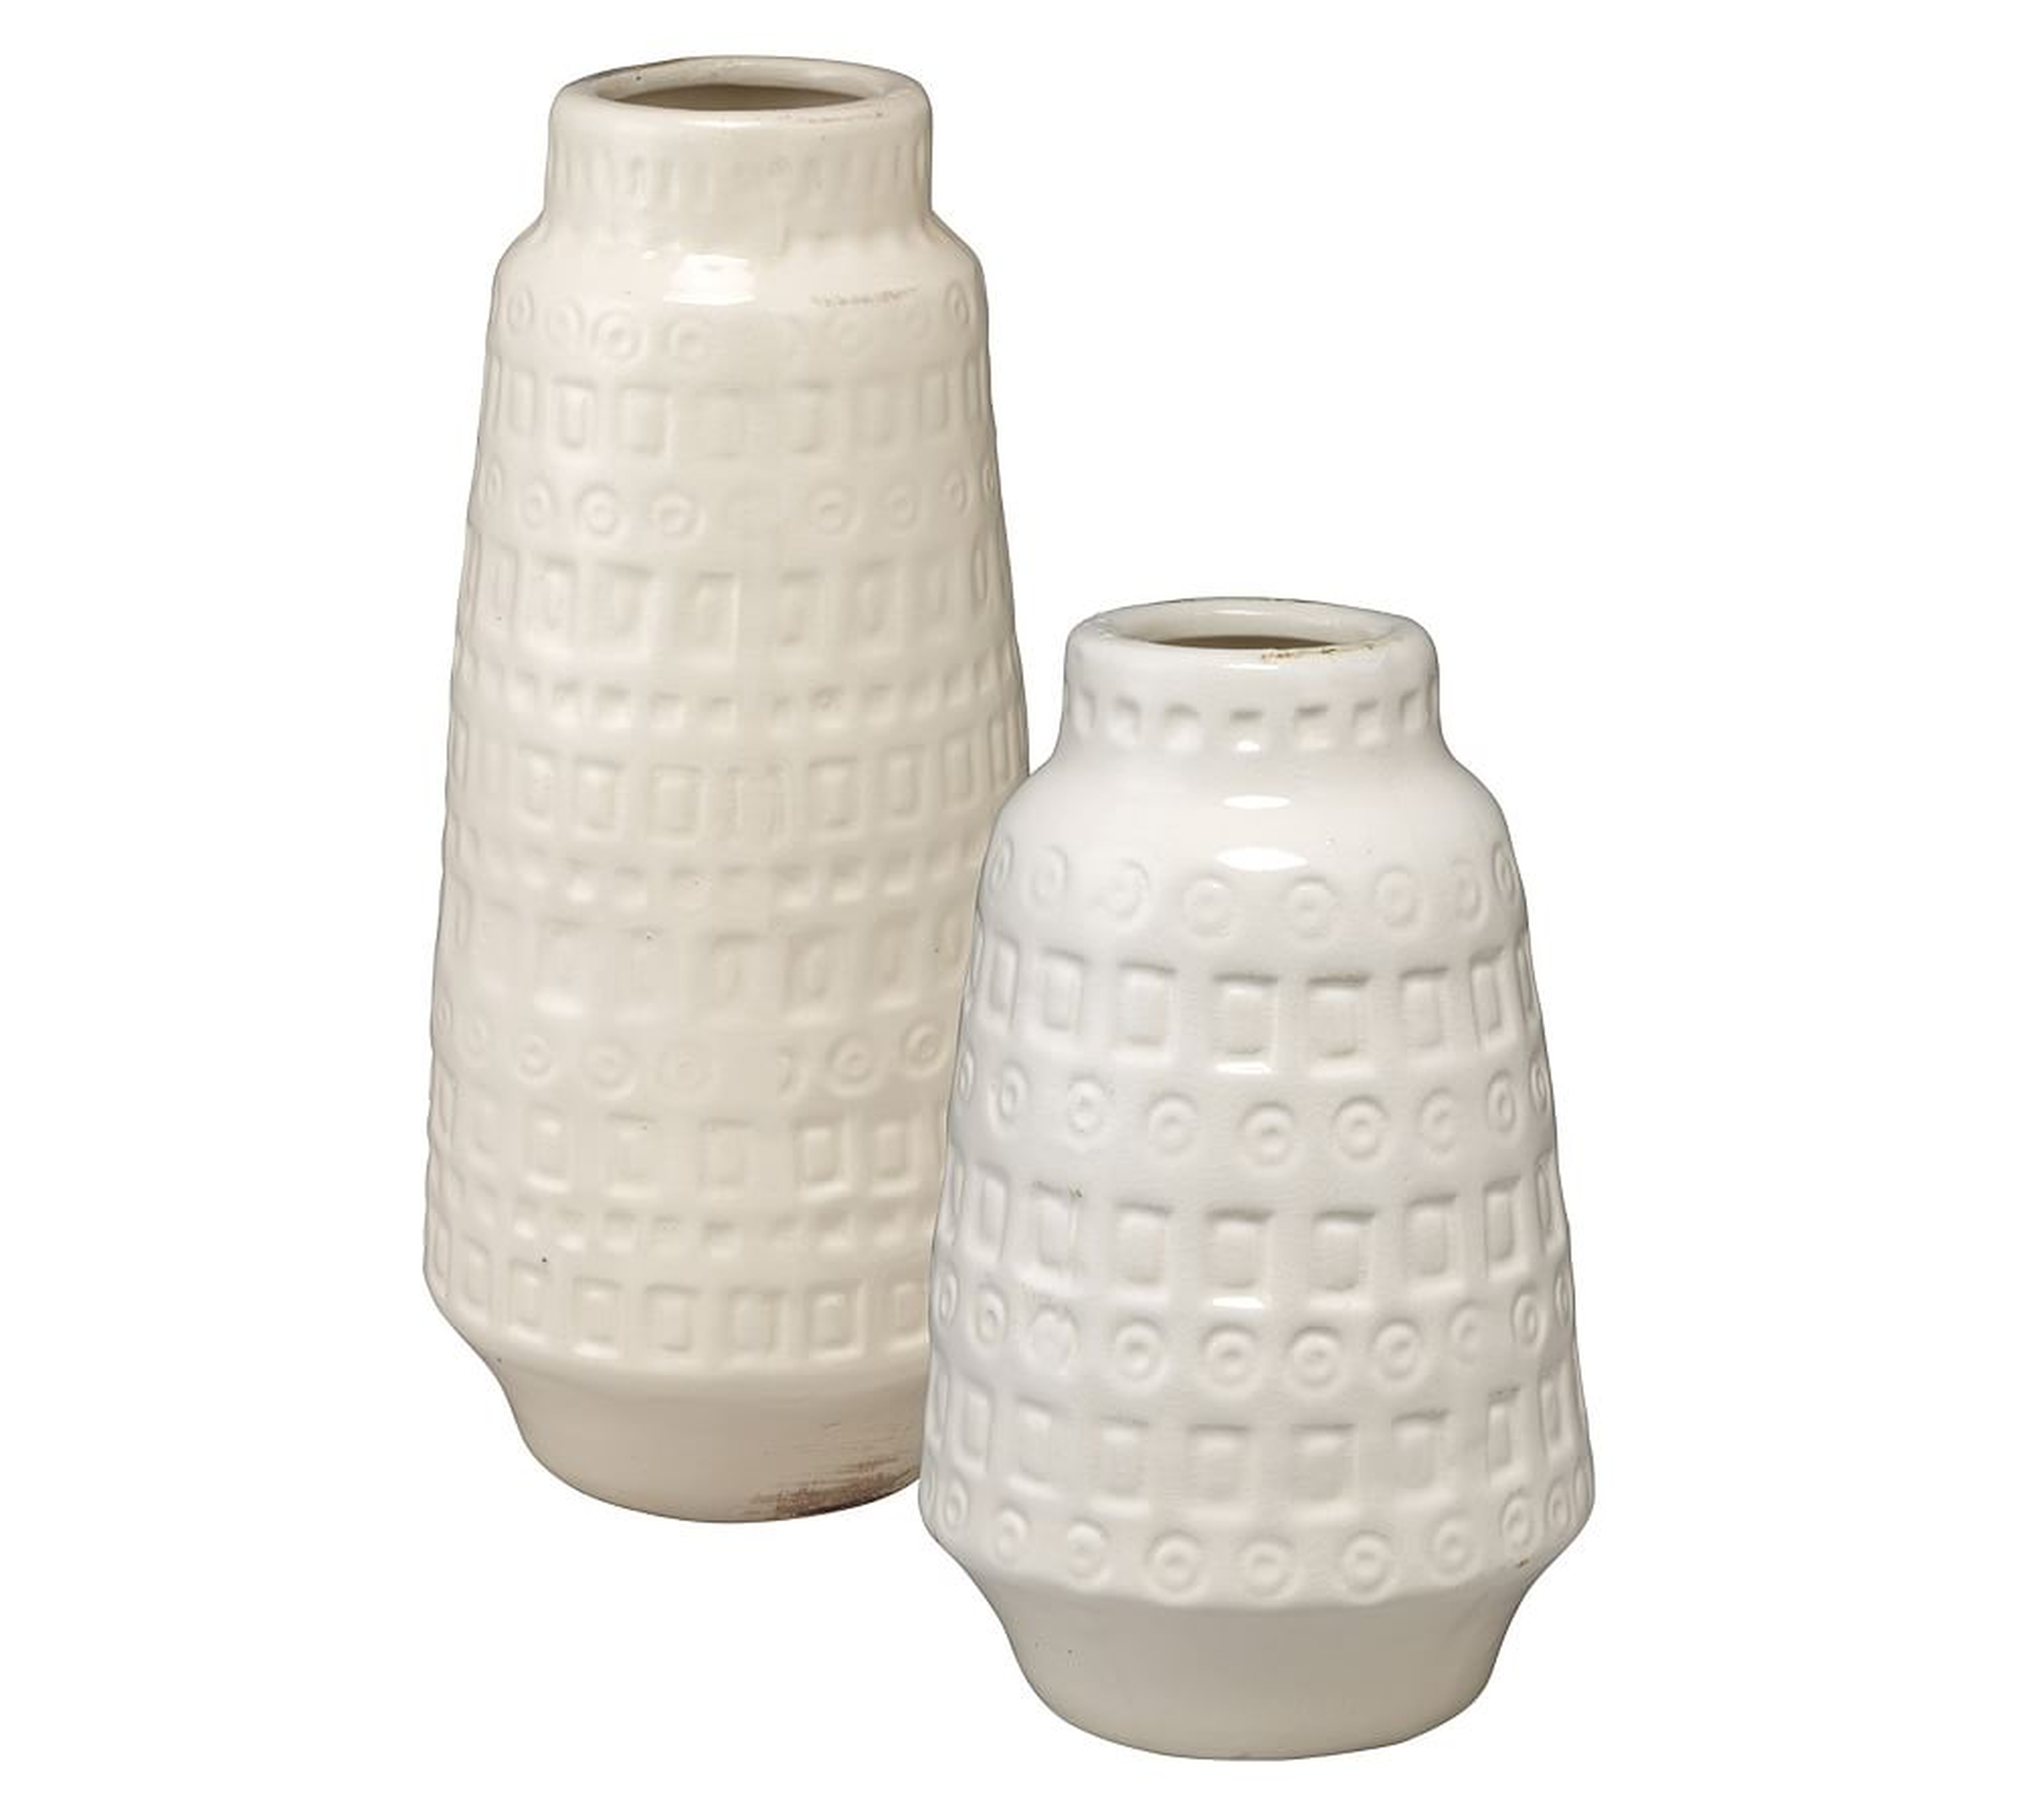 Quentin White Ceramic Vessels, Set Of 2 - Pottery Barn